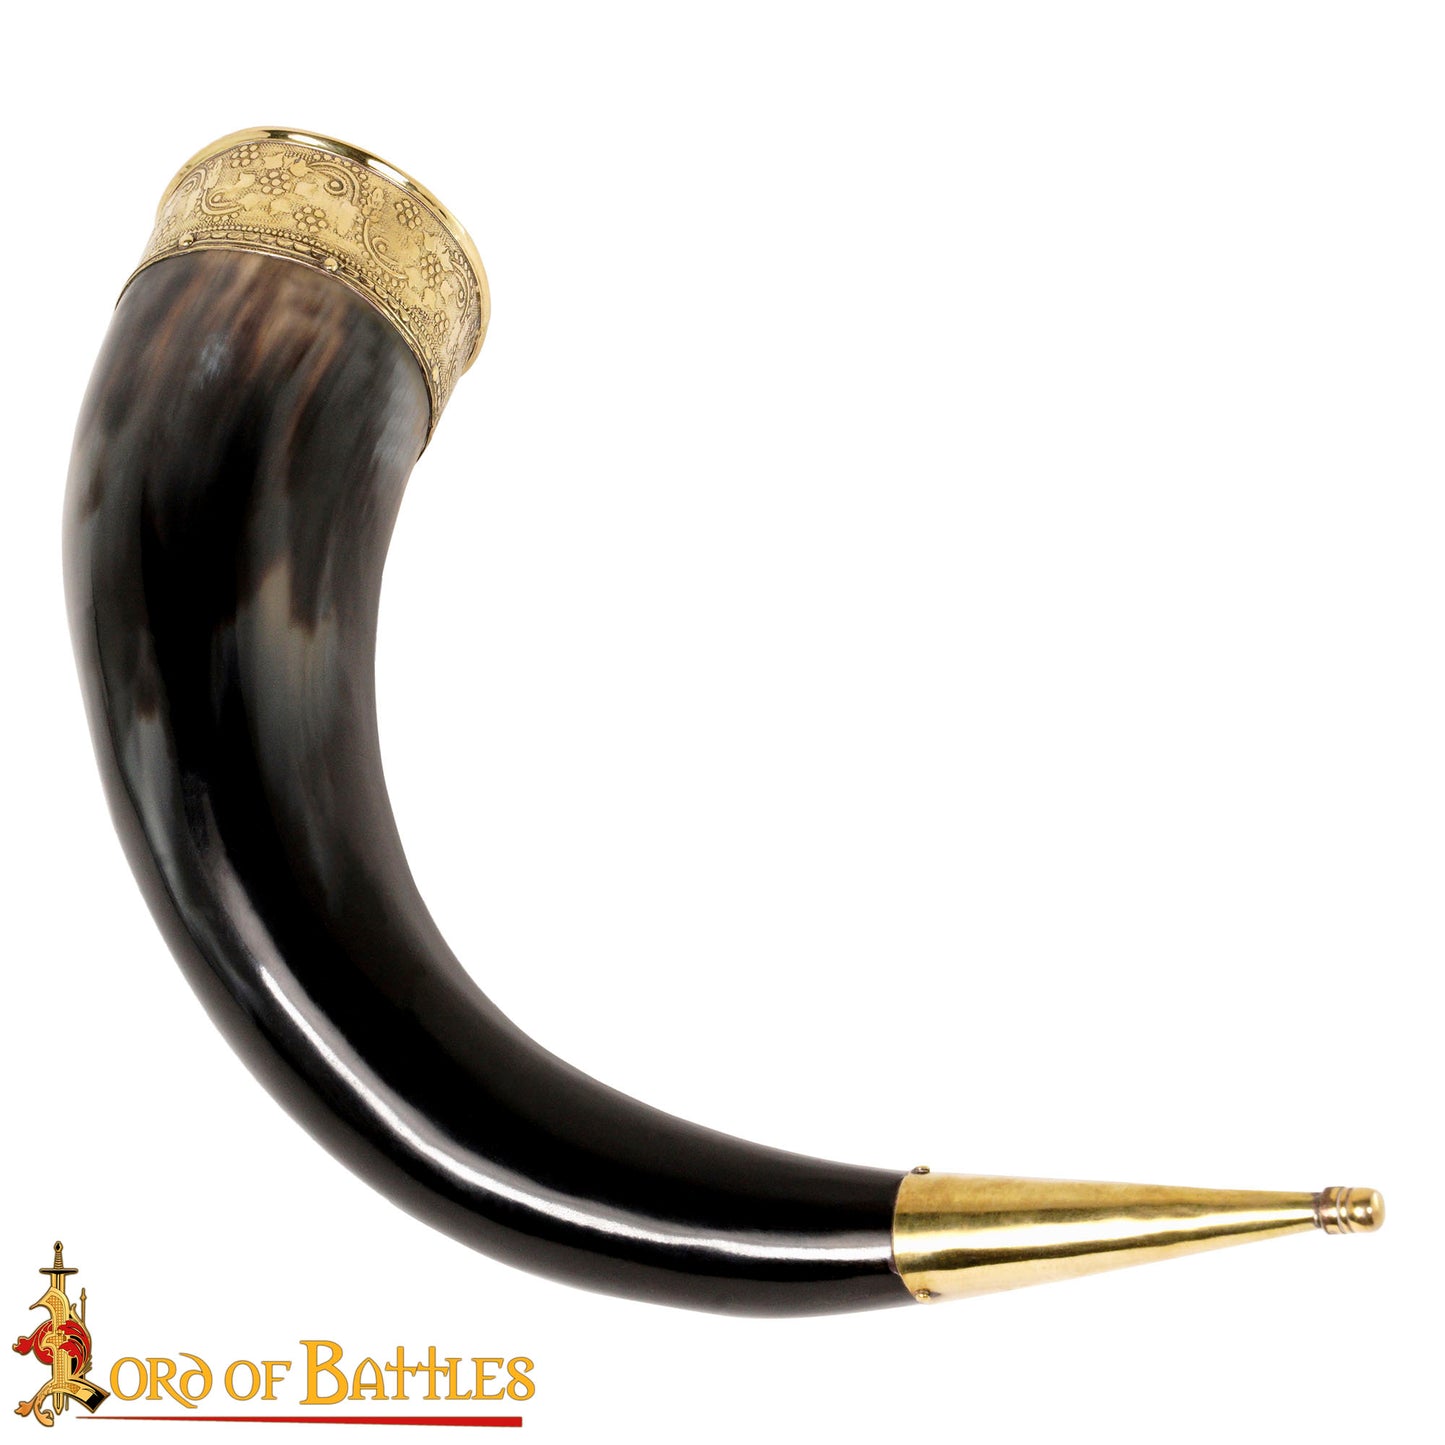 Viking Drinking Horn with Brass Decorations